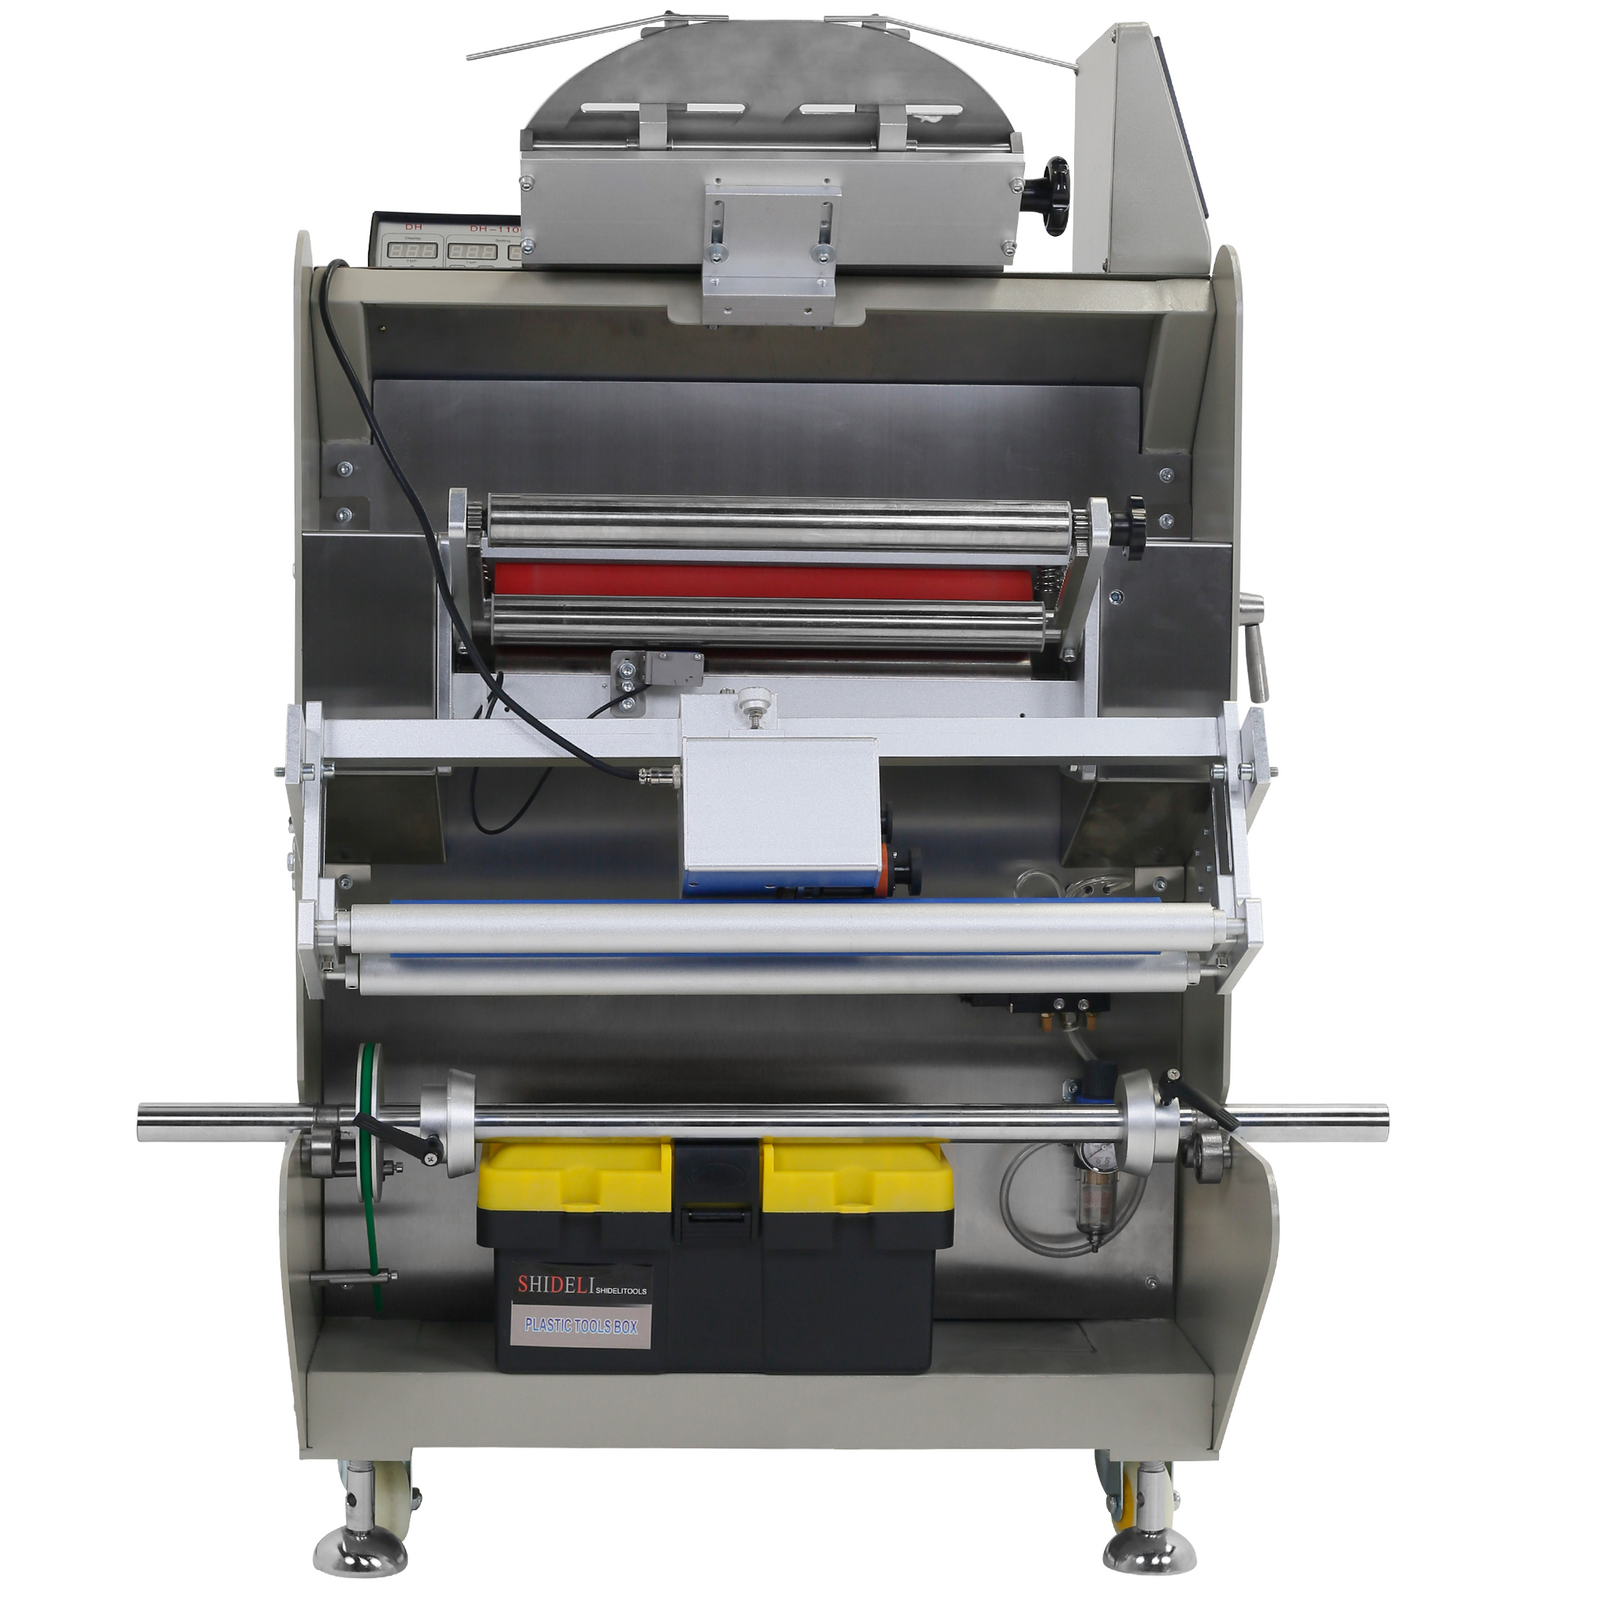 Gray powder coated automatic inclined JORES TECHNOLOGIES® flow wrapper. Showing where to locate the roll of plastic wrap and also shows a box of service tools that is included with the machine